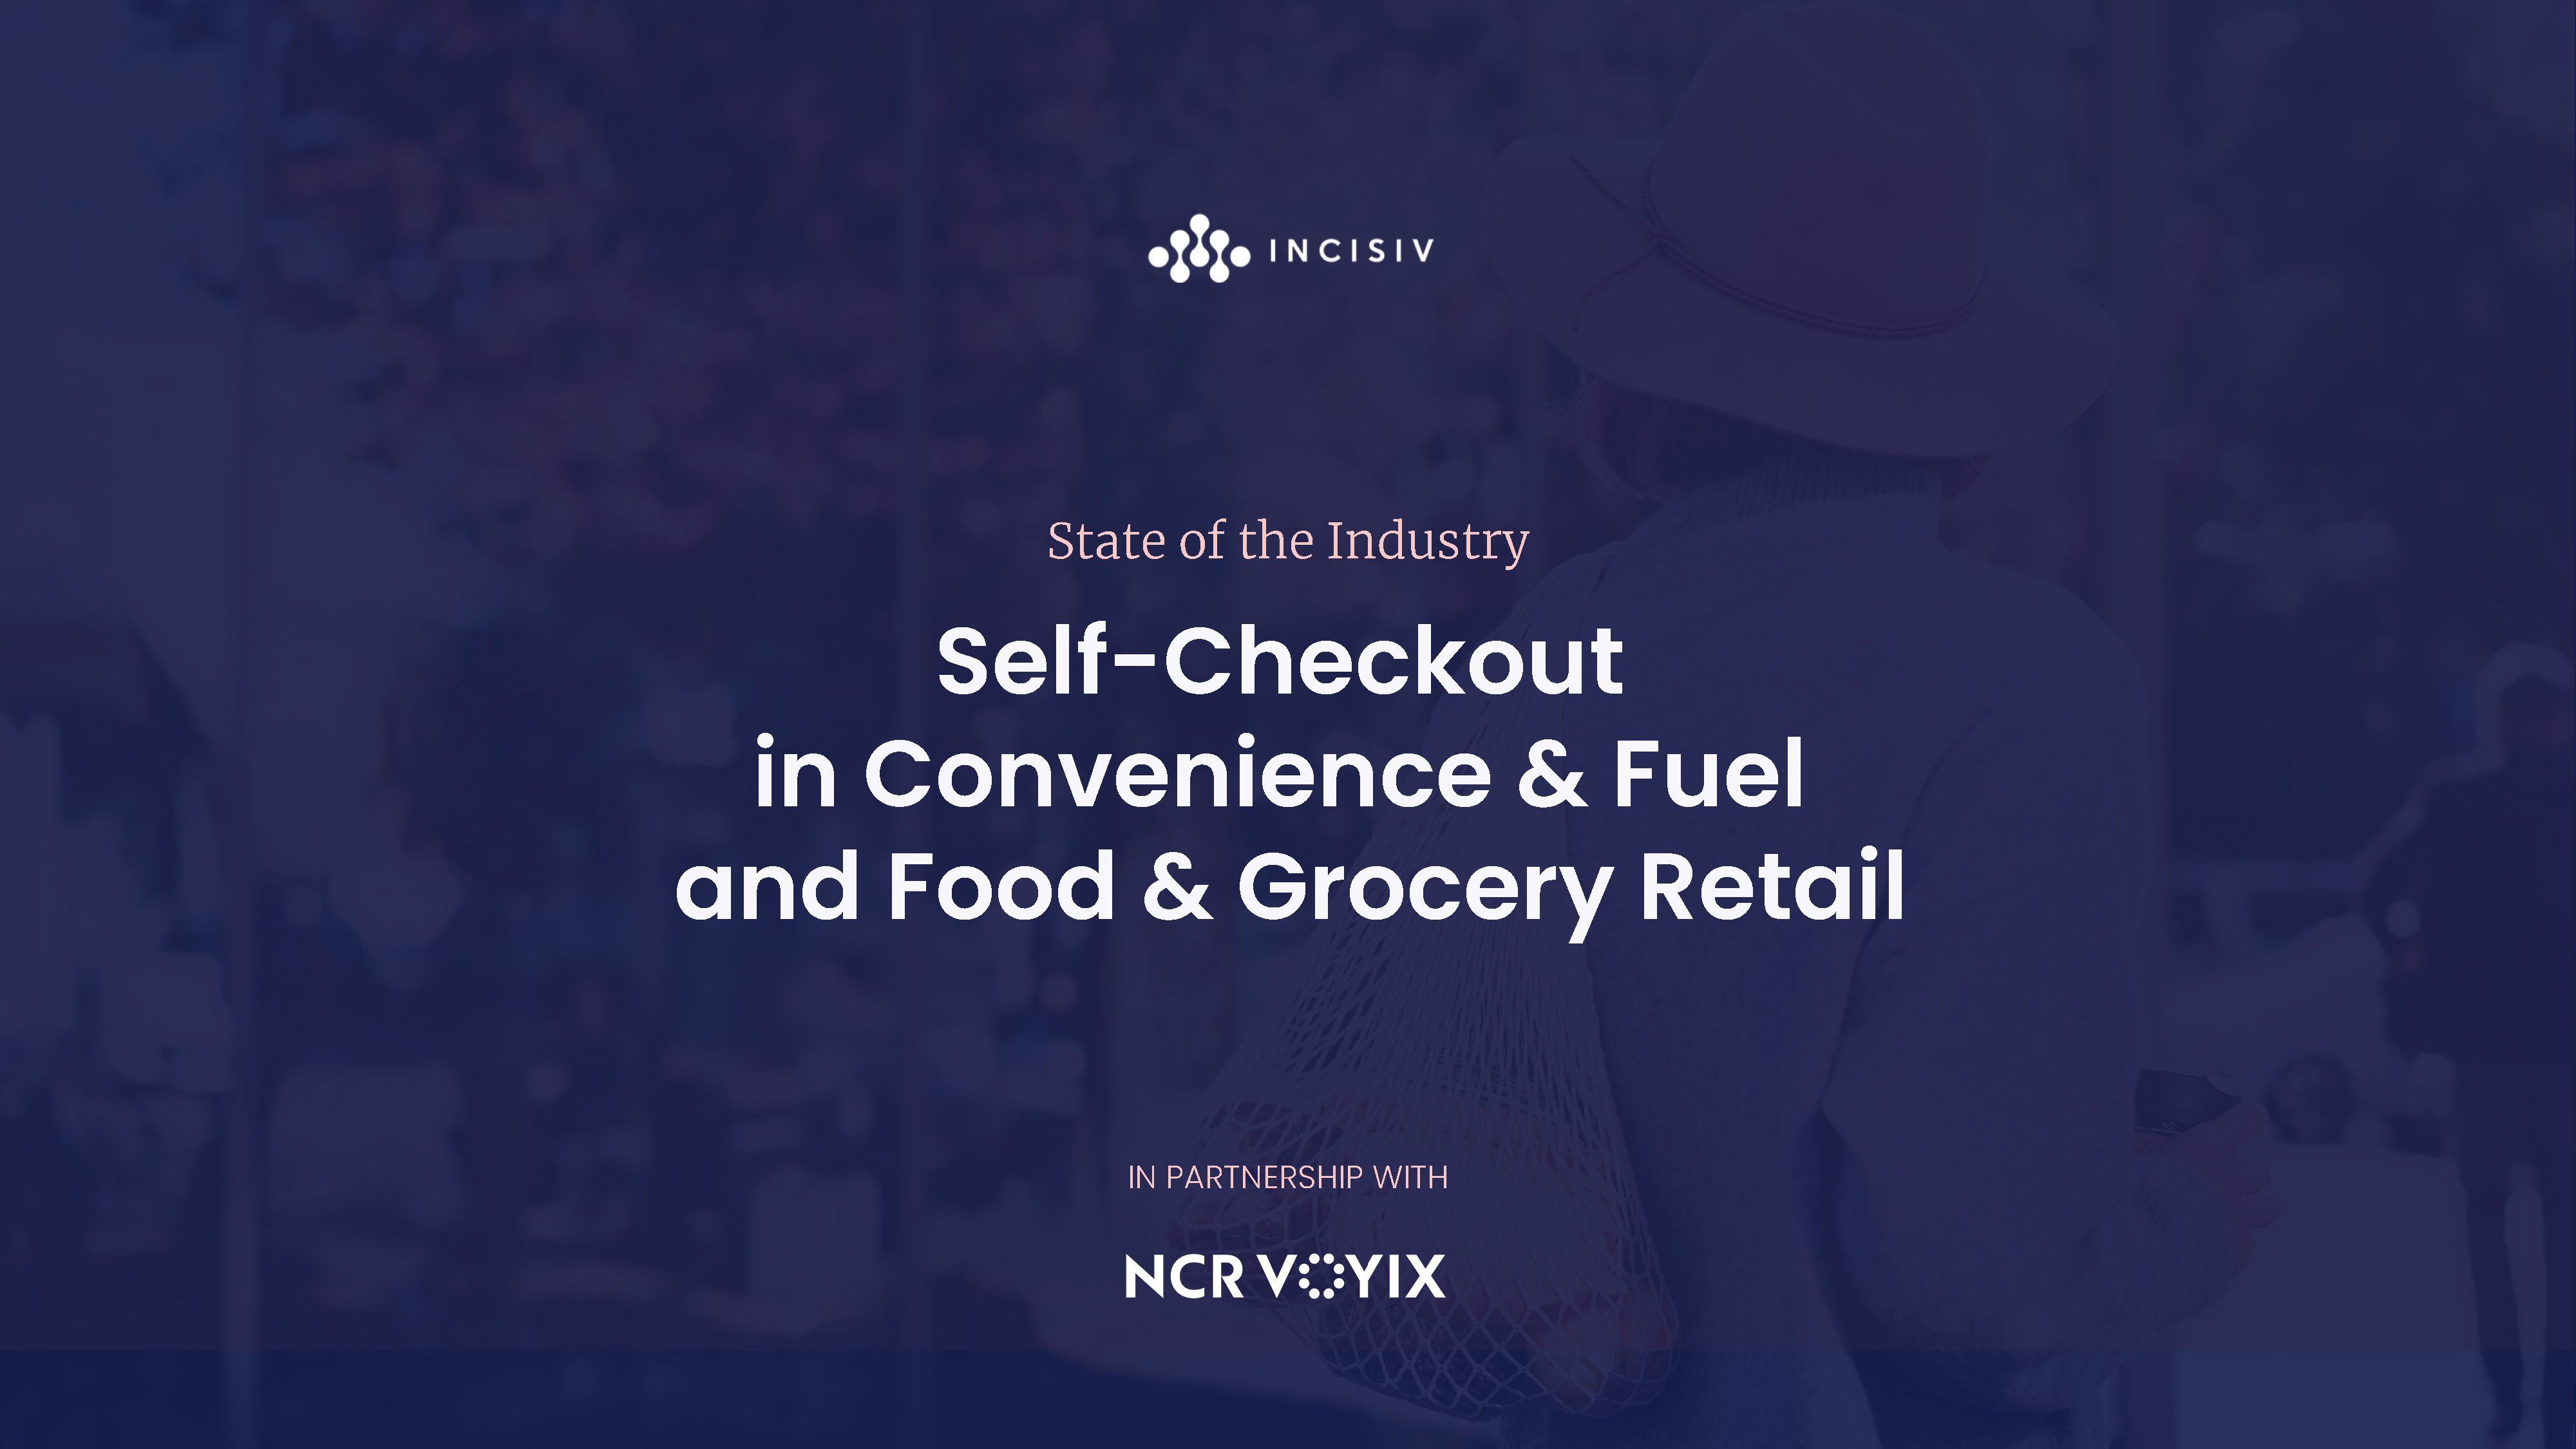 Self-Checkout in Convenience & Fuel and Food & Grocery Retail